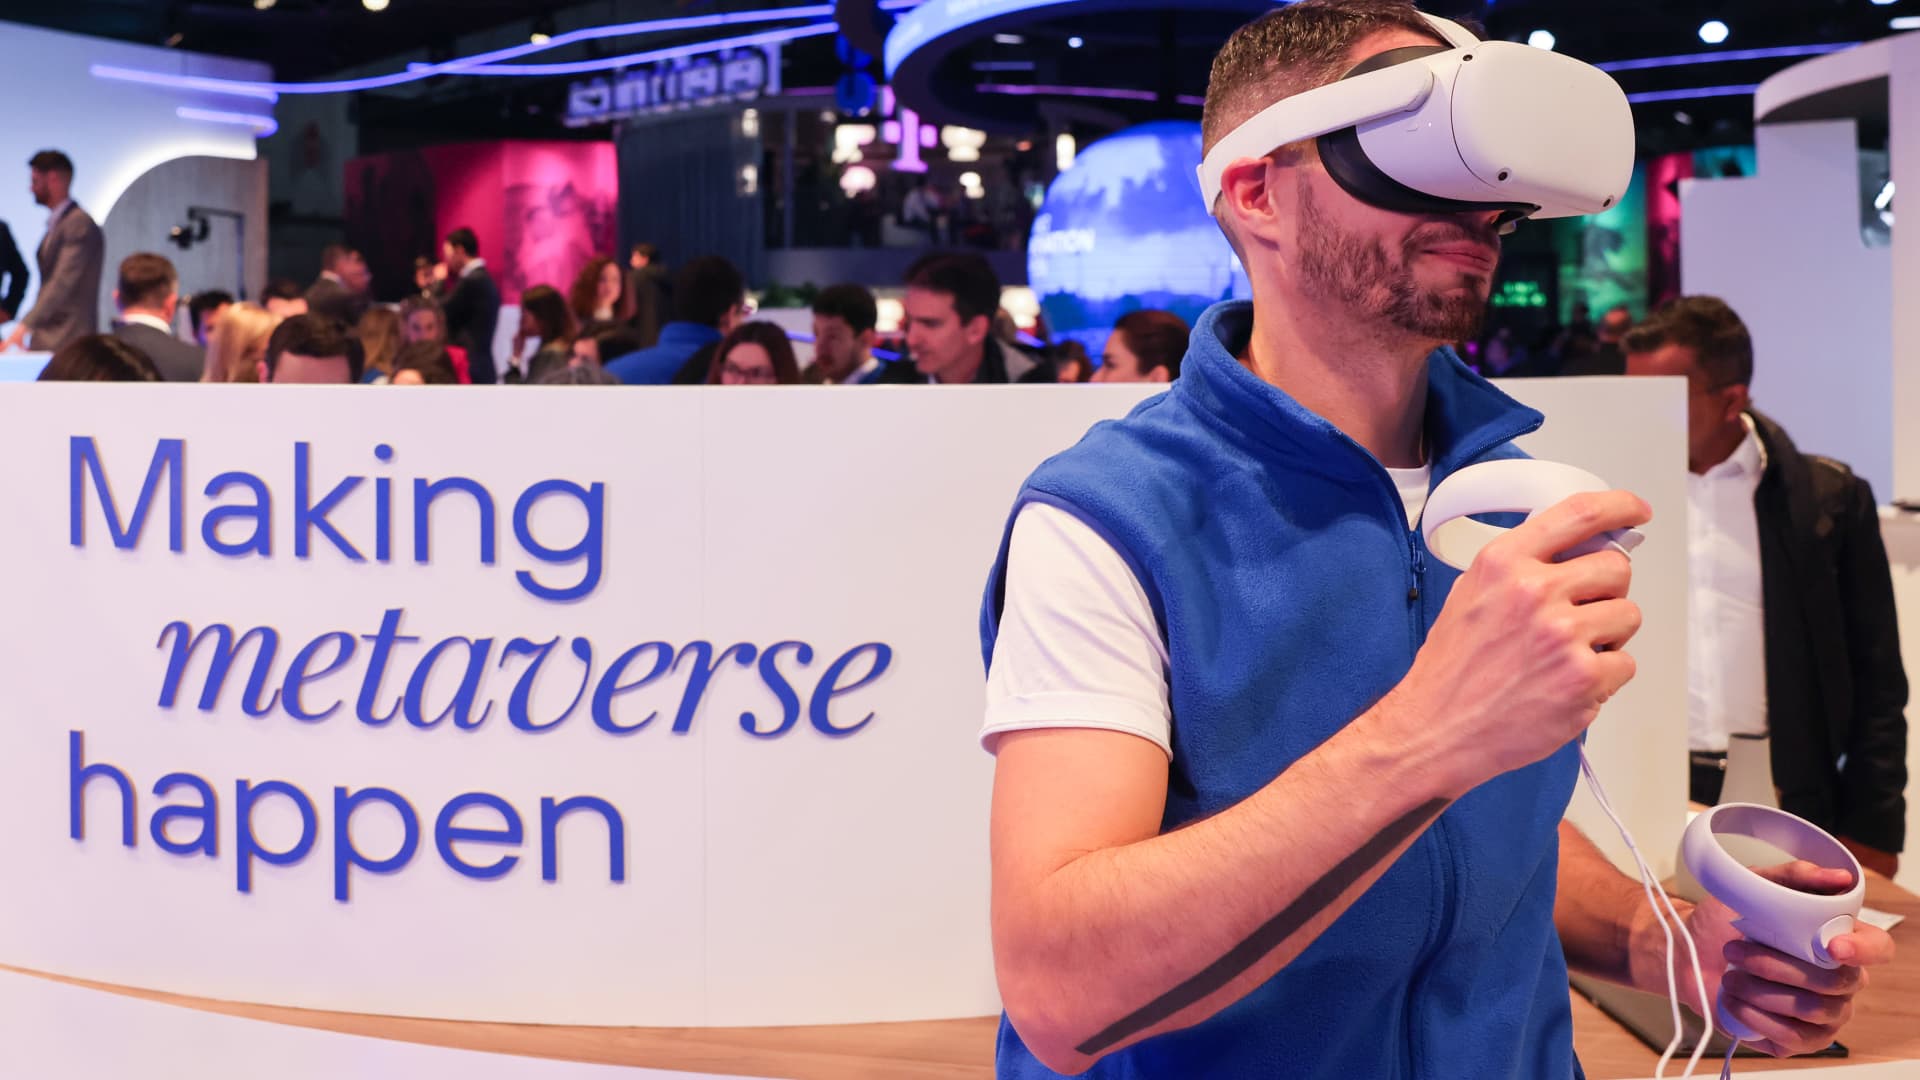 VR market keeps shrinking even as Meta pours billions of dollars a quarter into metaverse